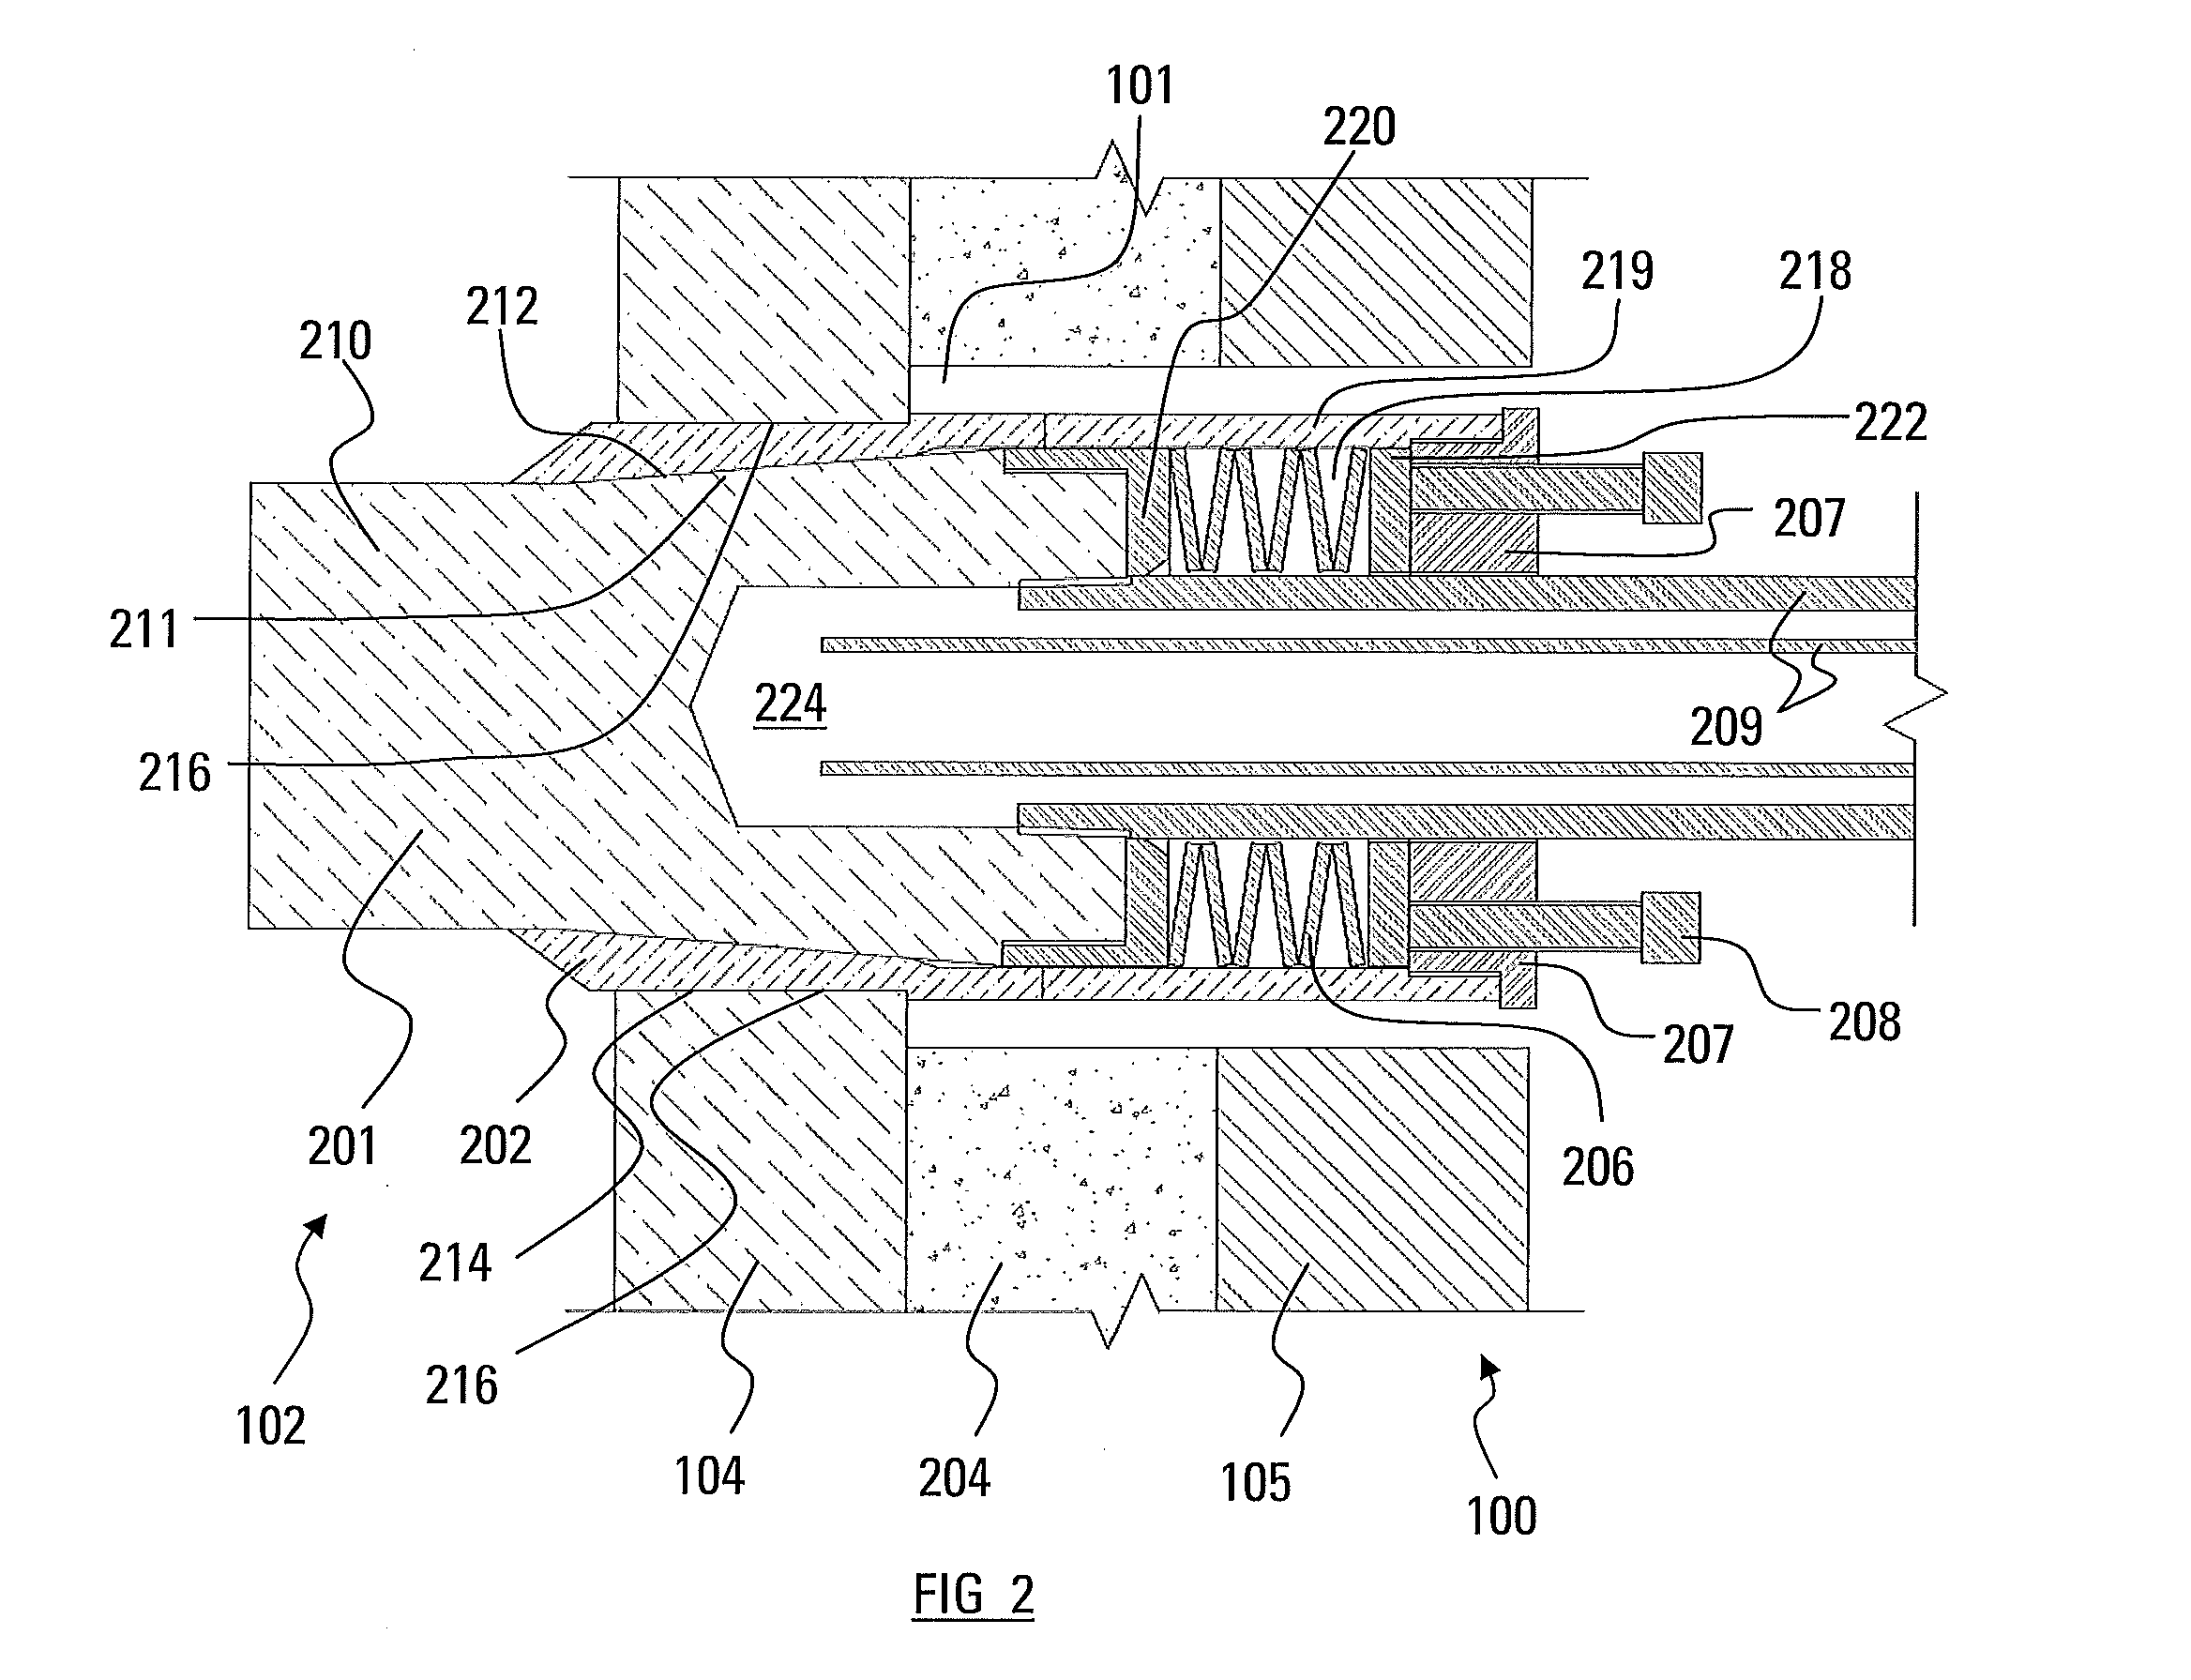 Furnace cooling system with thermally conductive joints between cooling elements